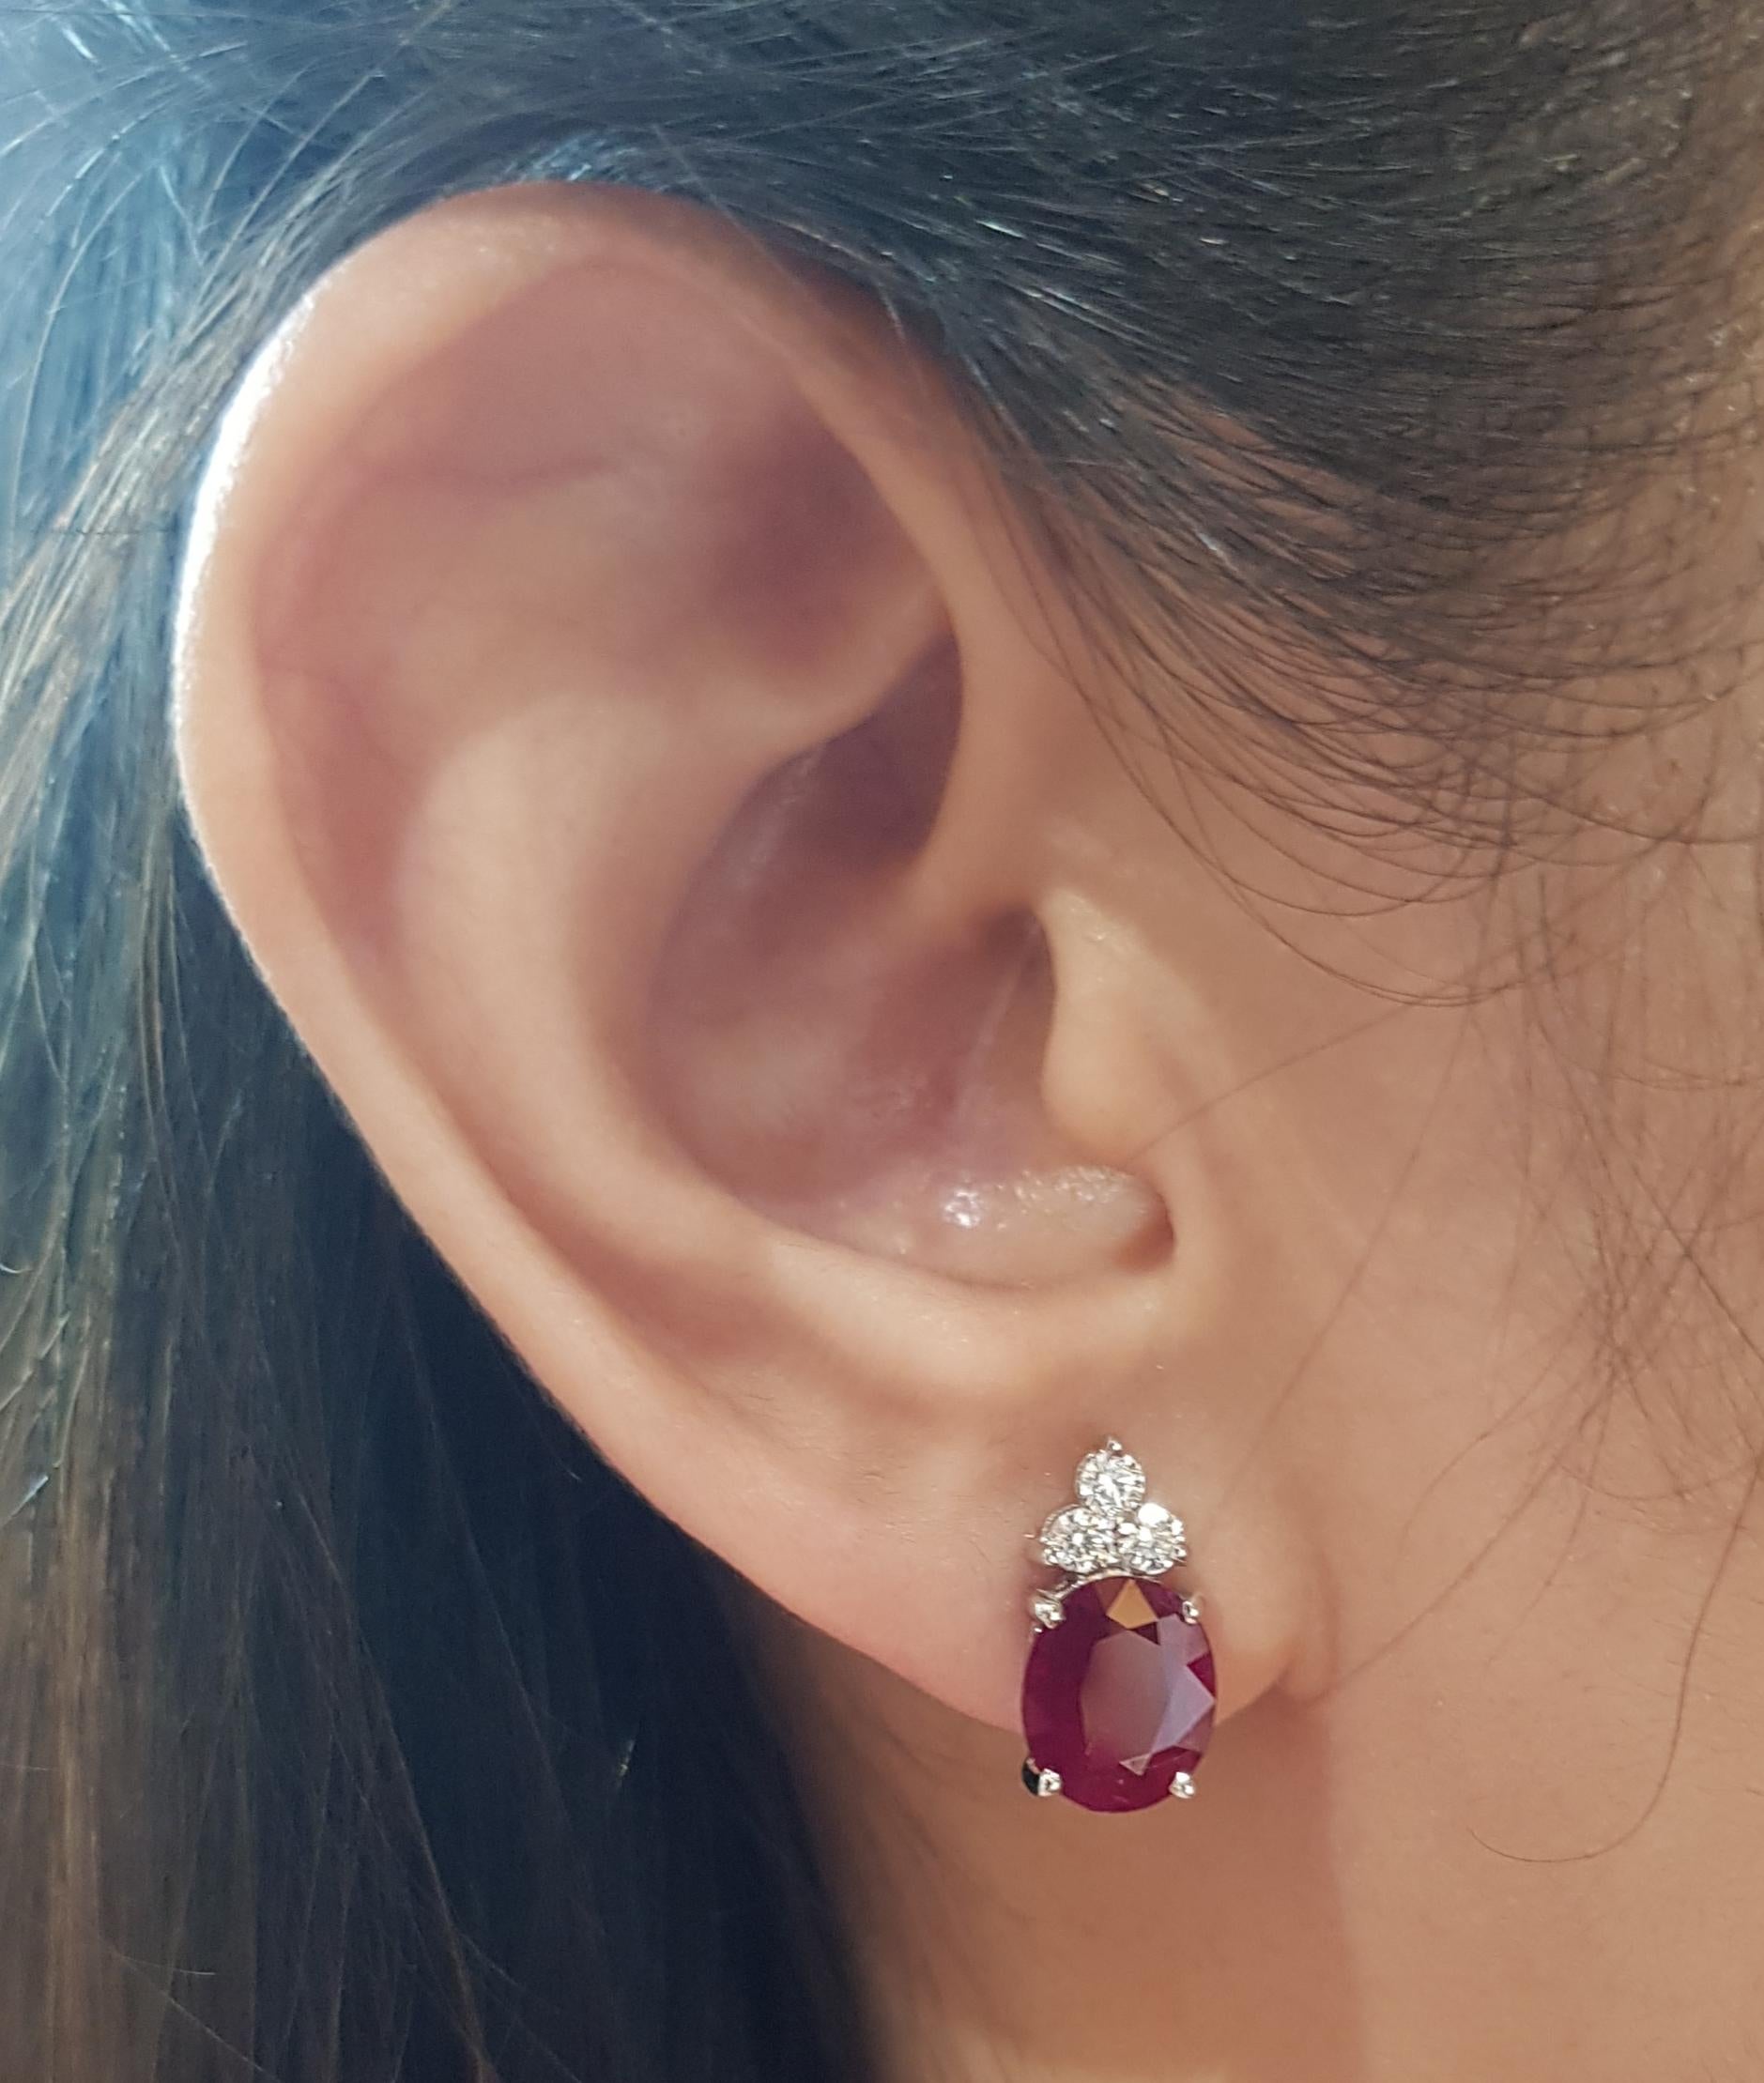 Ruby 4.62 carats with Diamond 0.37 carat Earrings set in 18 Karat White Gold Settings

Width:  0.8 cm 
Length:  1.5 cm
Total Weight: 4.86 grams

